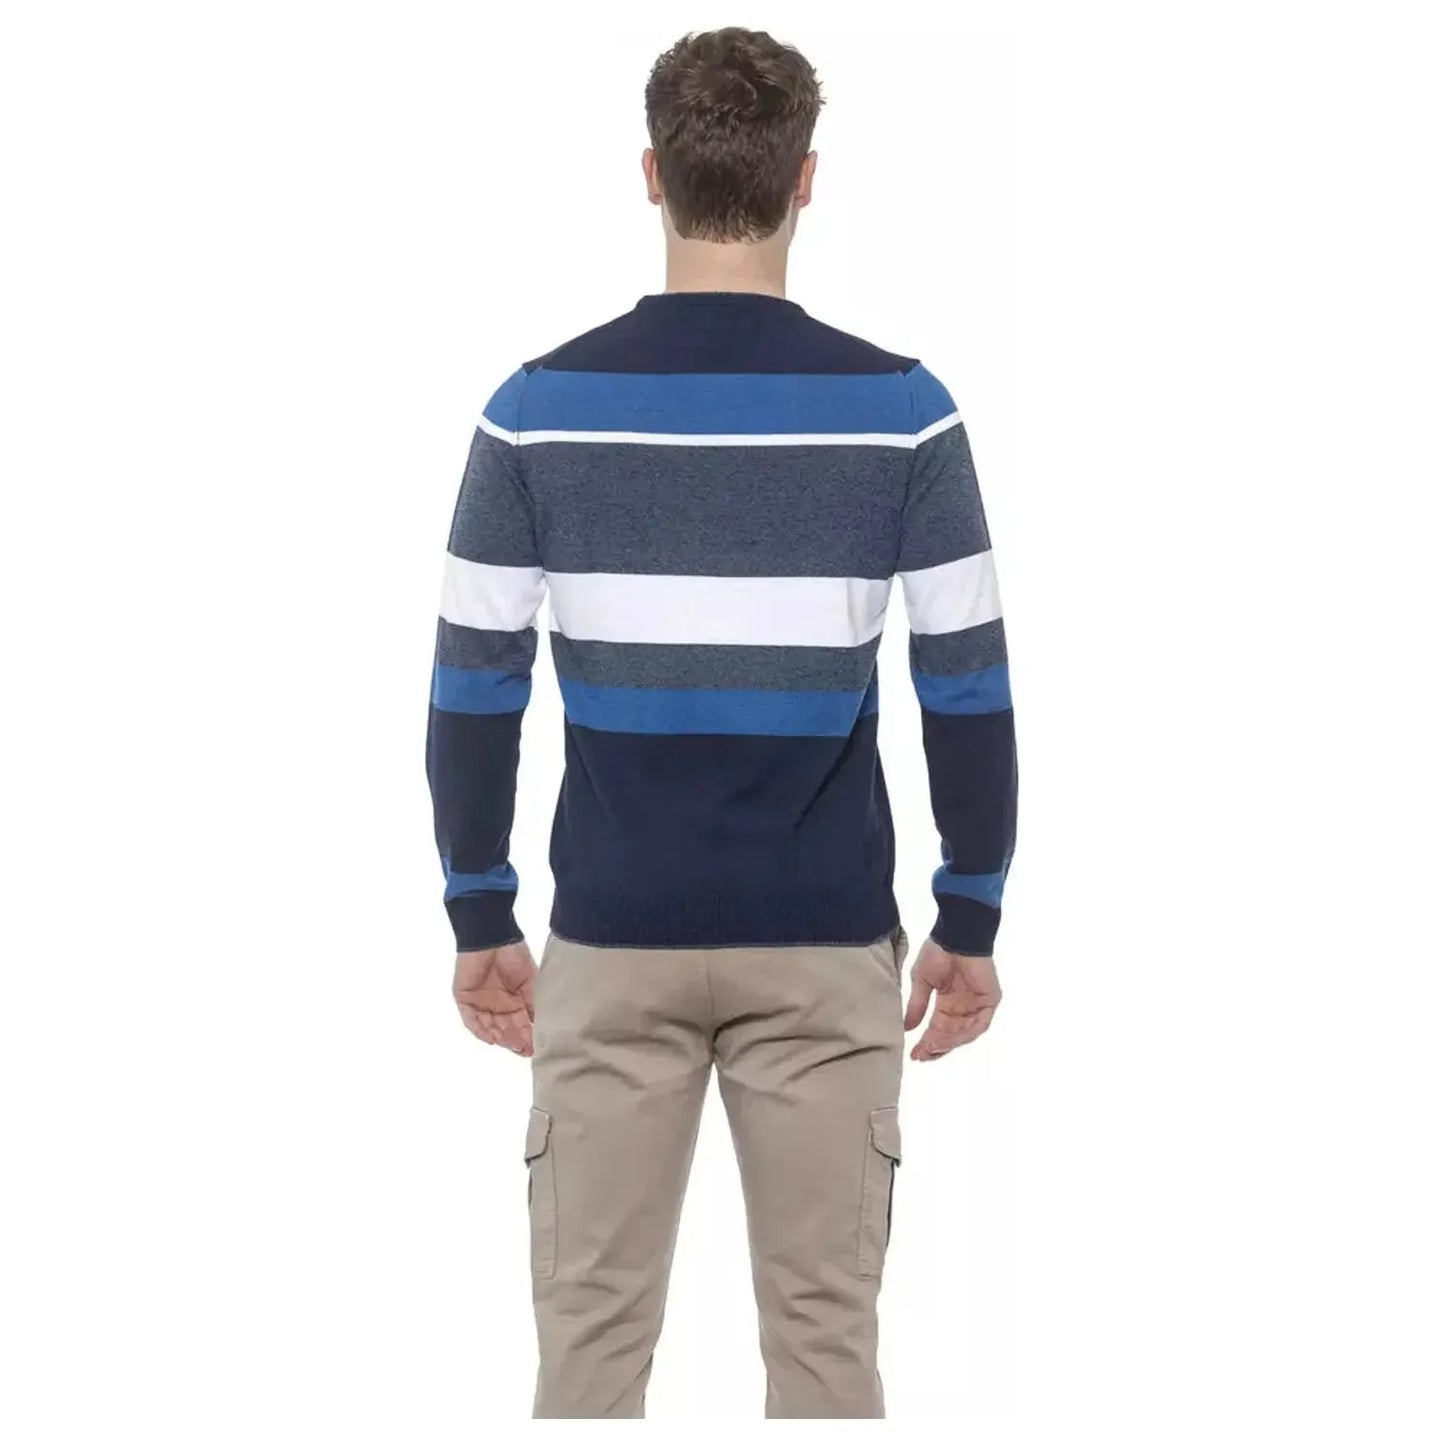 Conte of Florence Elegant Striped Crewneck Sweater in Blue prussianblue-sweater-4 stock_product_image_20327_2106863981-16-f24cc7ef-aad.webp